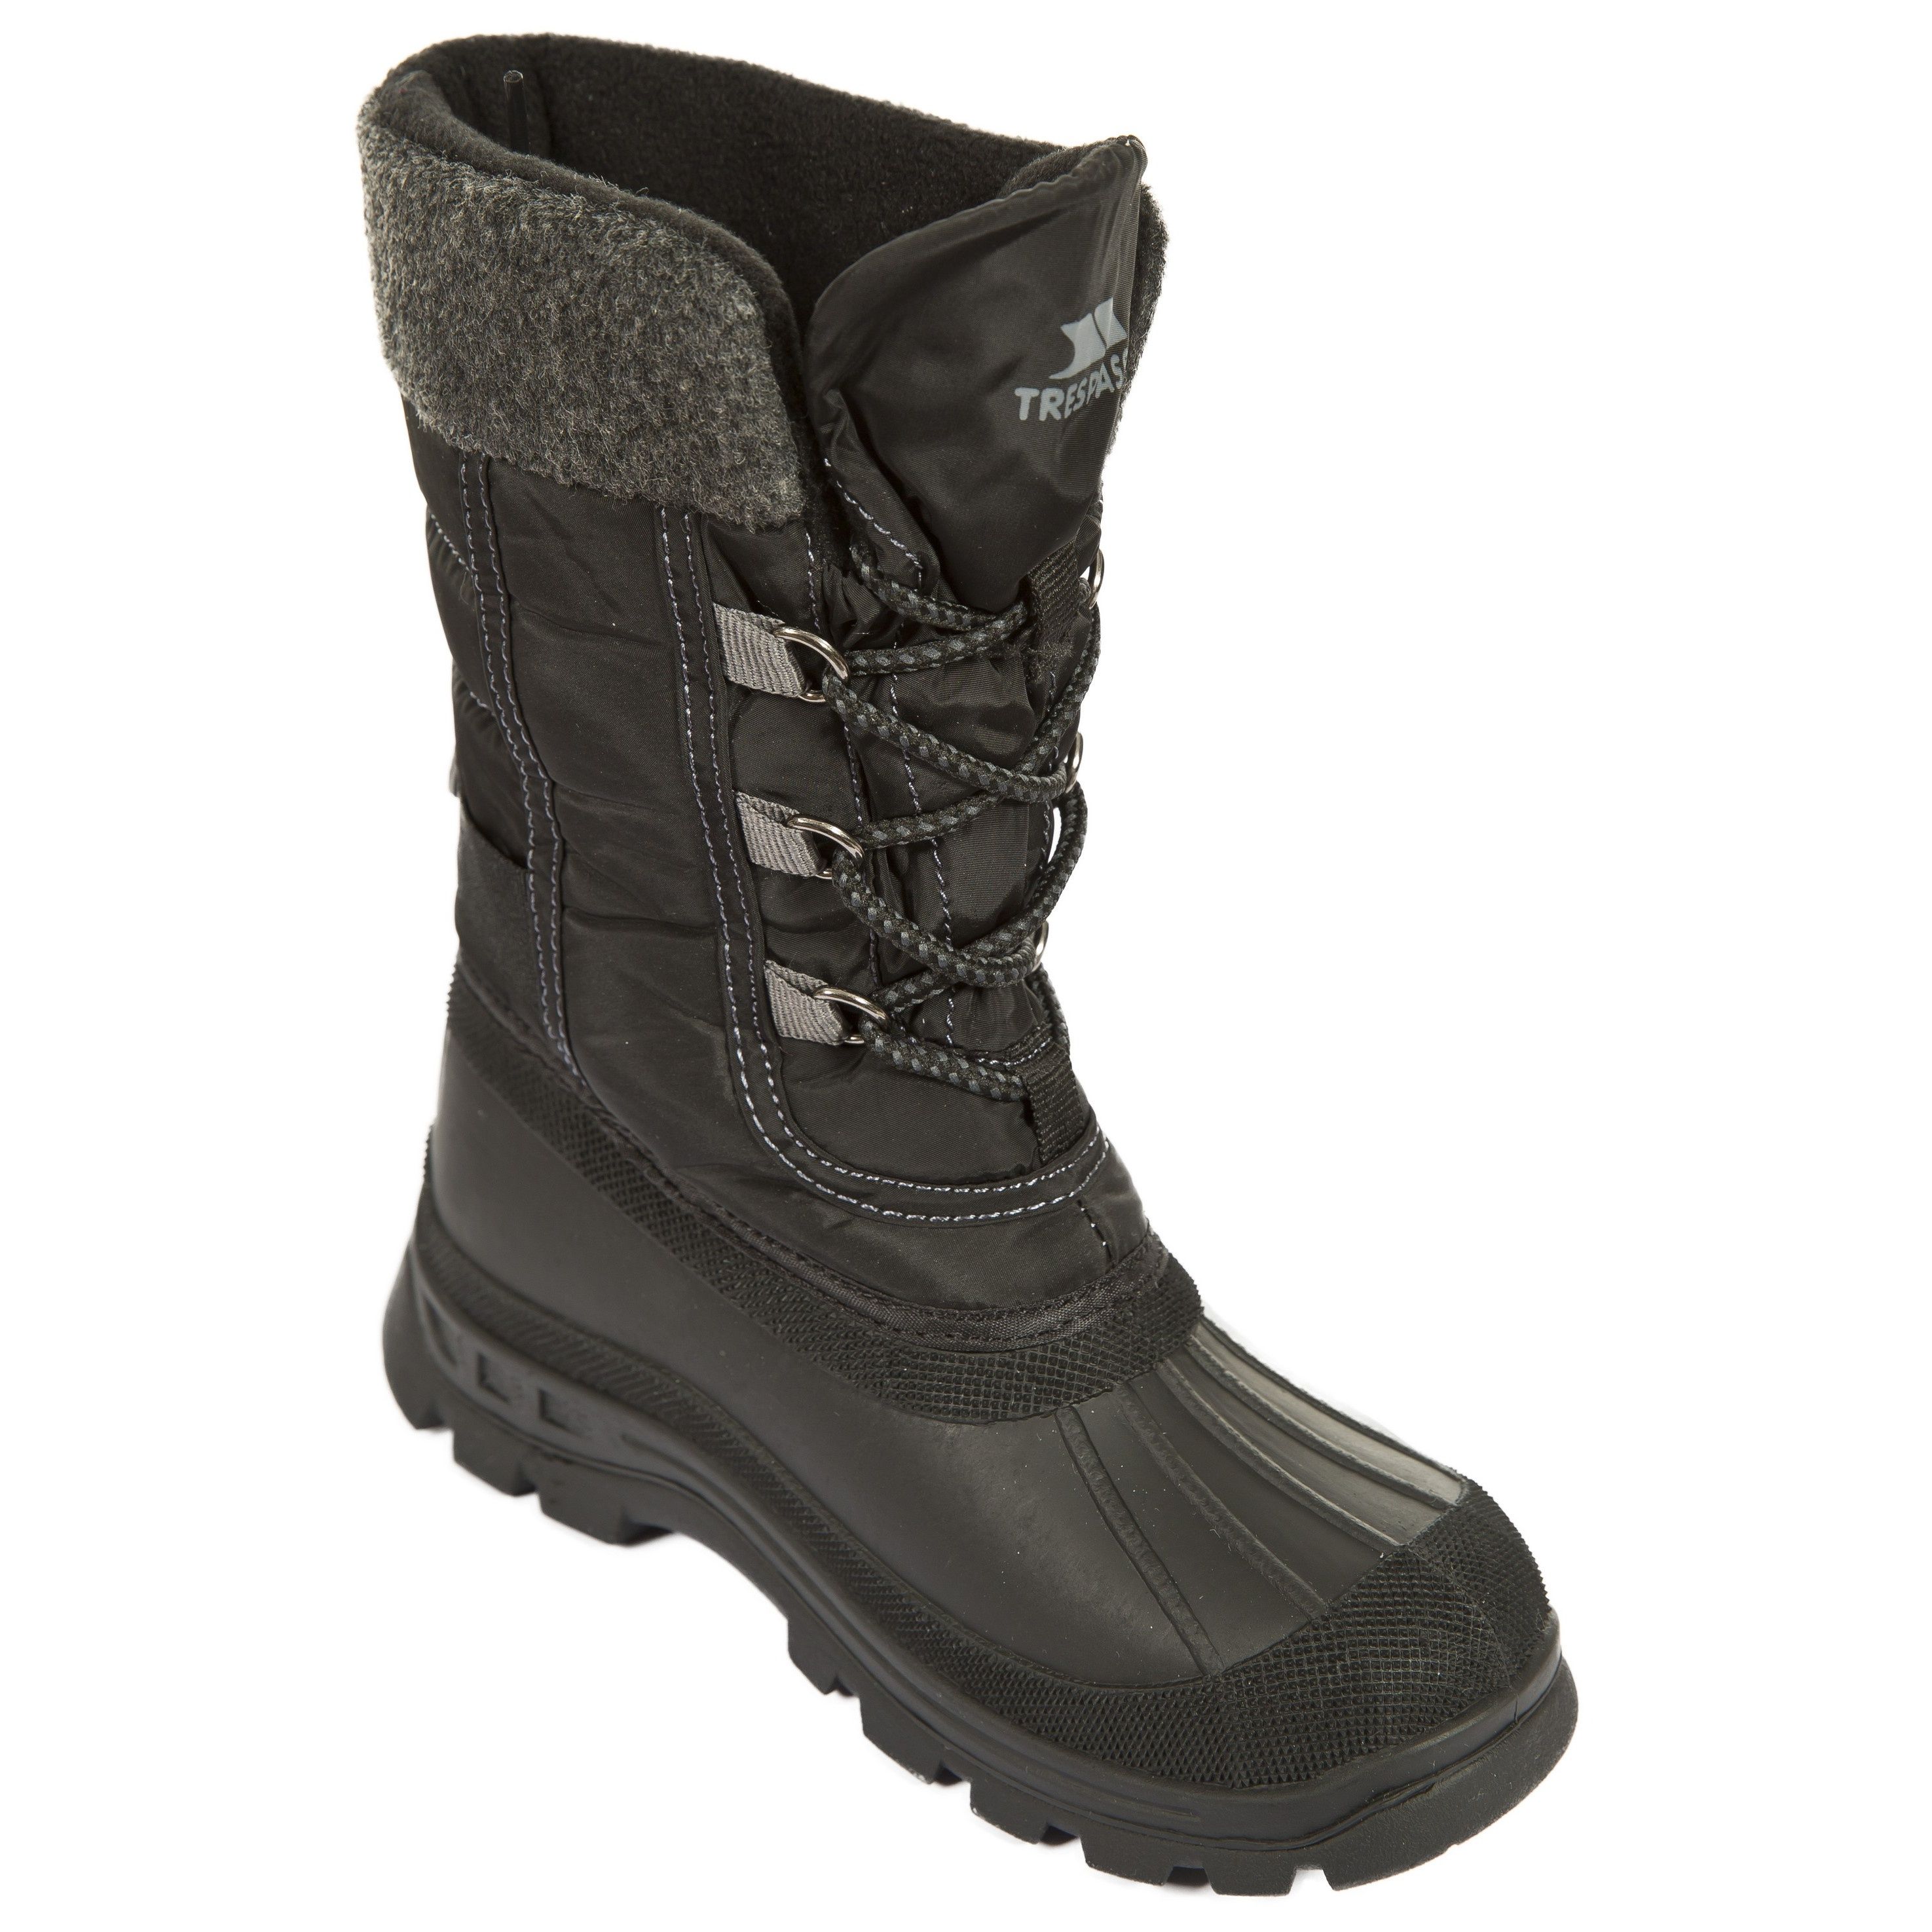 Boys snow boot. Insulated and warm fleece lined. Waterproof rubber shell outsole. Water resistant textile upper. Adjustable touch fastening strap. Sherpa fleece collar. Upper: Textile/Sherpa fleece, Lining: Fleece, Outsole: Rubber.